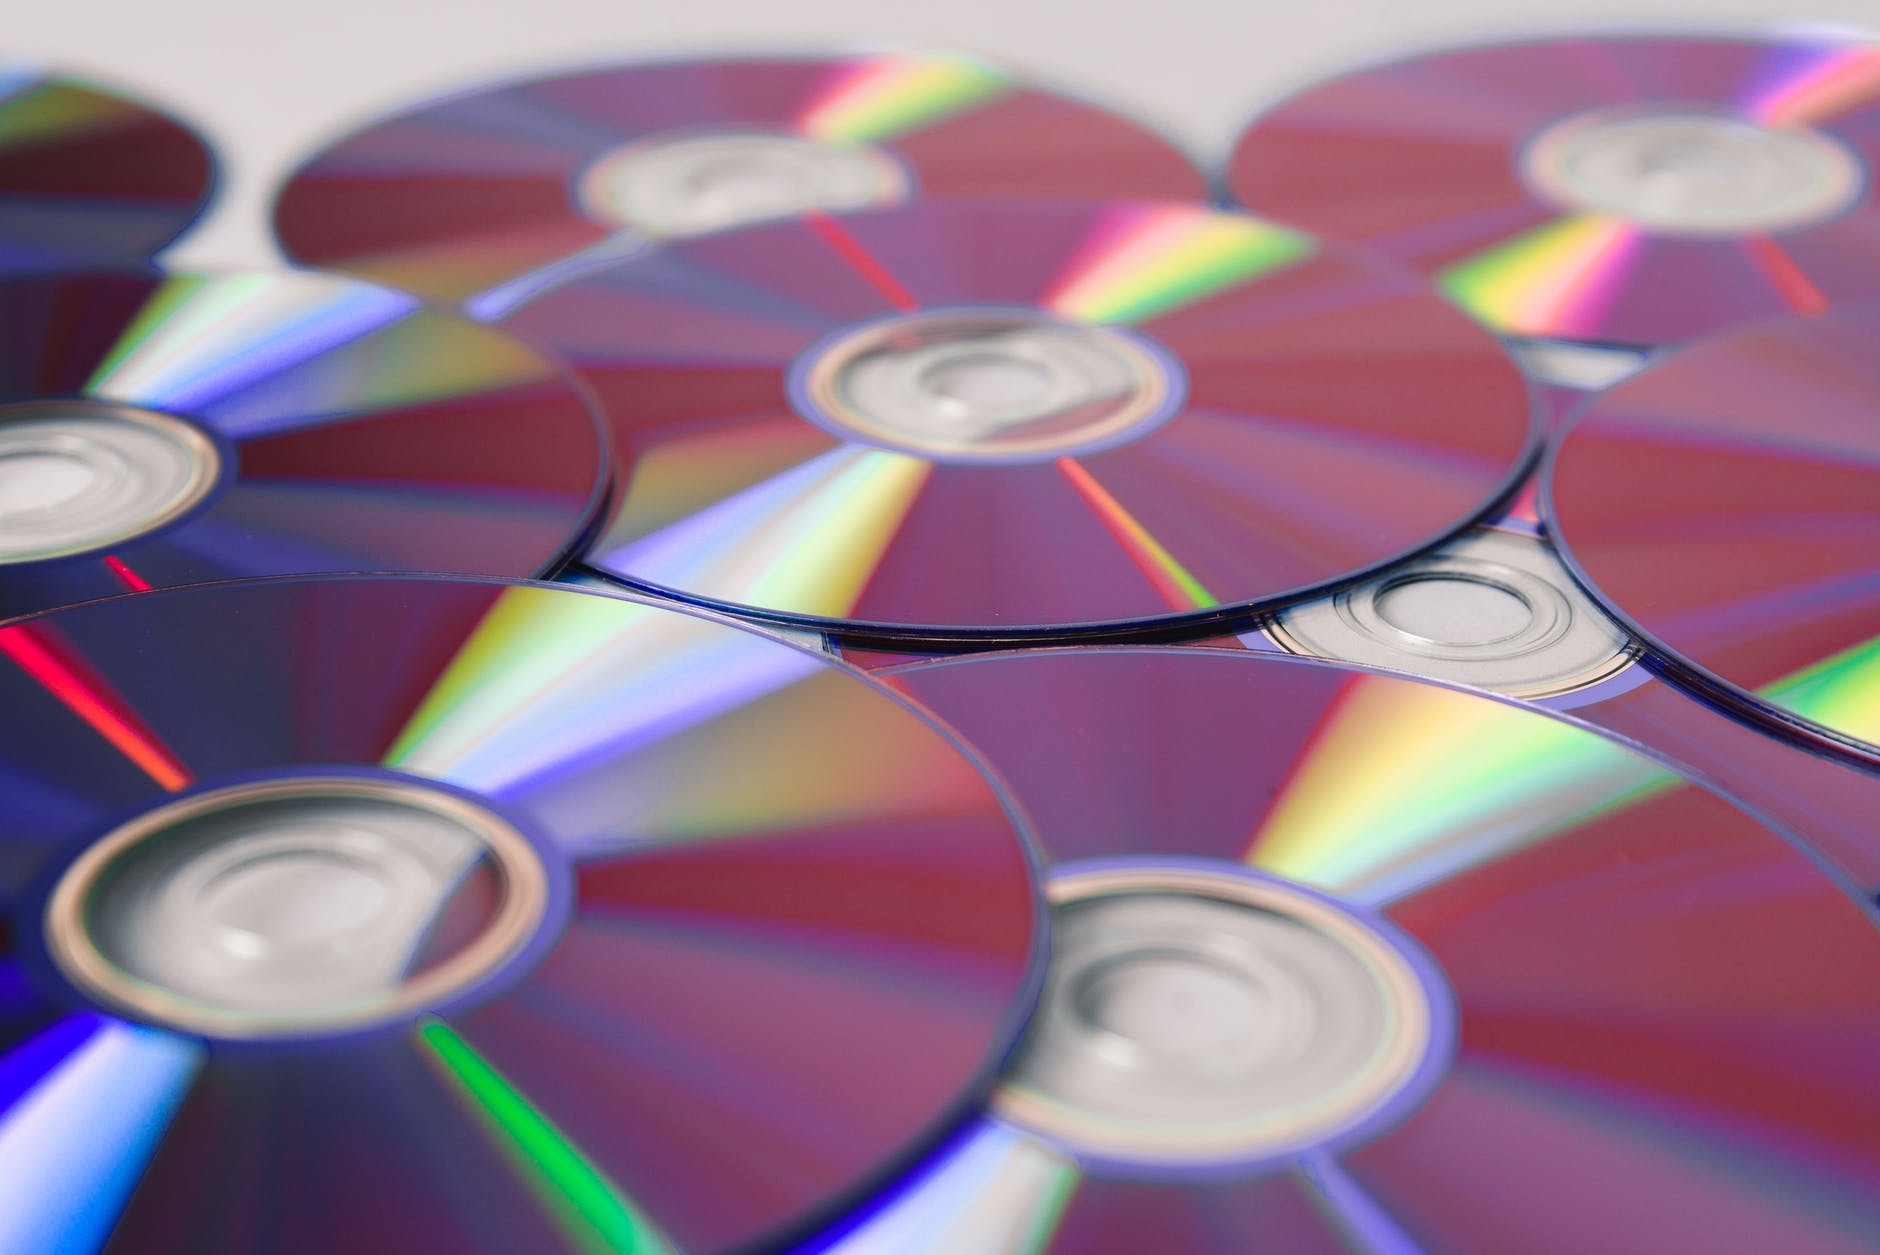 compact discs in close up view